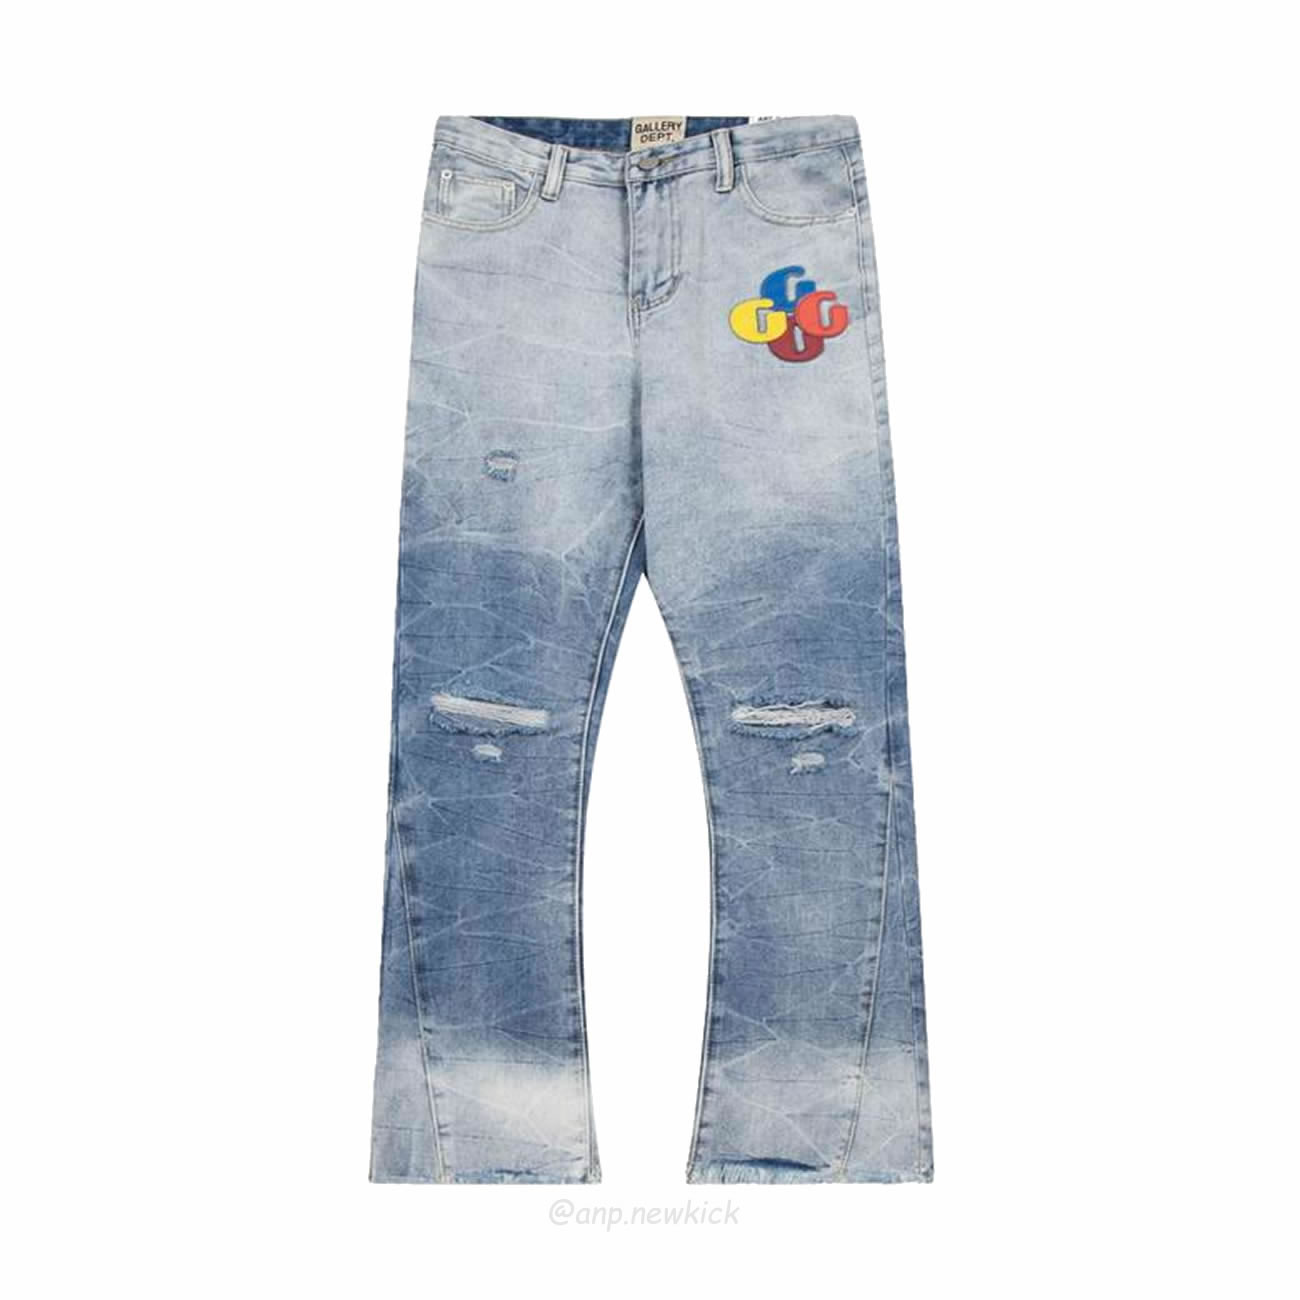 Gallery Dept. Colorful Letter Pattern Street Pants (7) - newkick.org